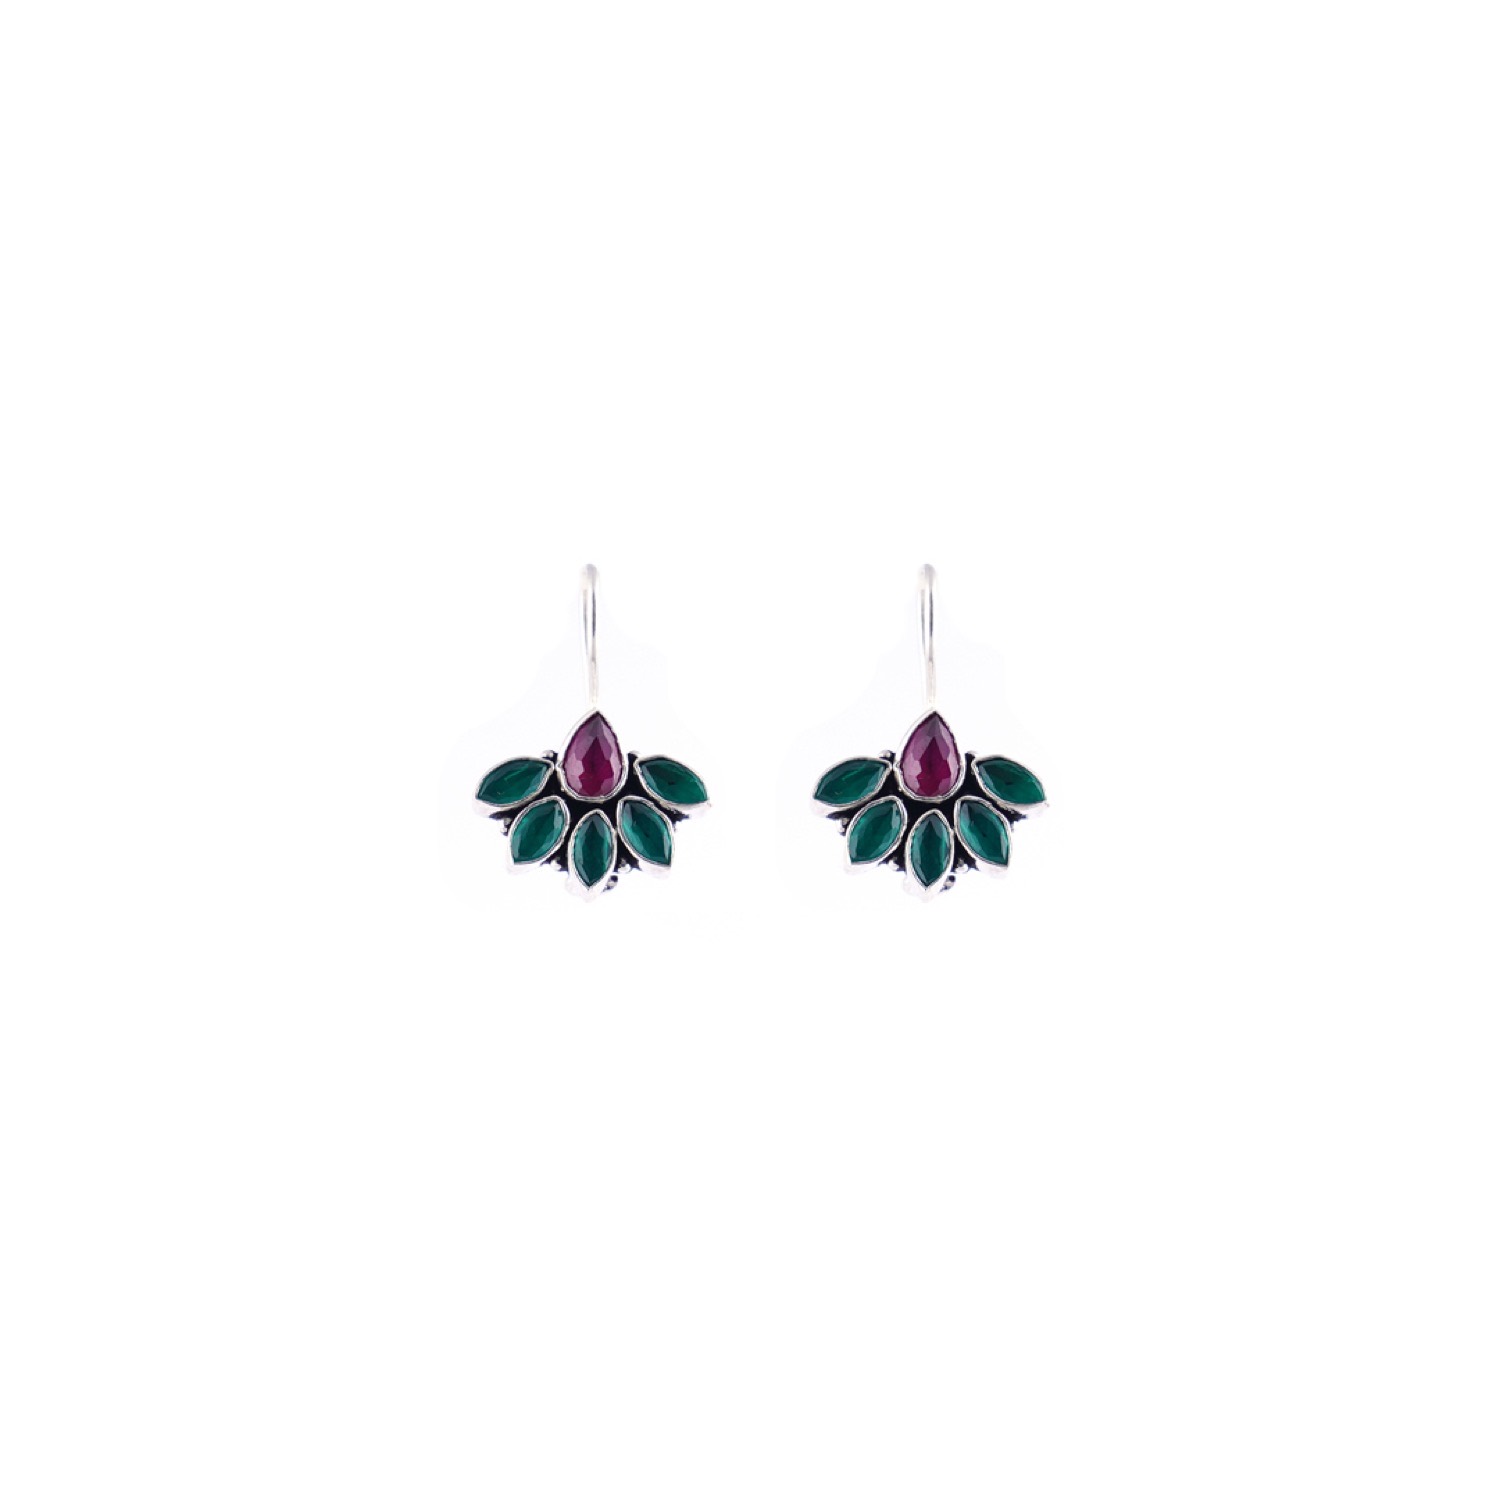 varam_earrings_102022_red_and_green_stone_antique_finish_hoop_silver_earrings-1